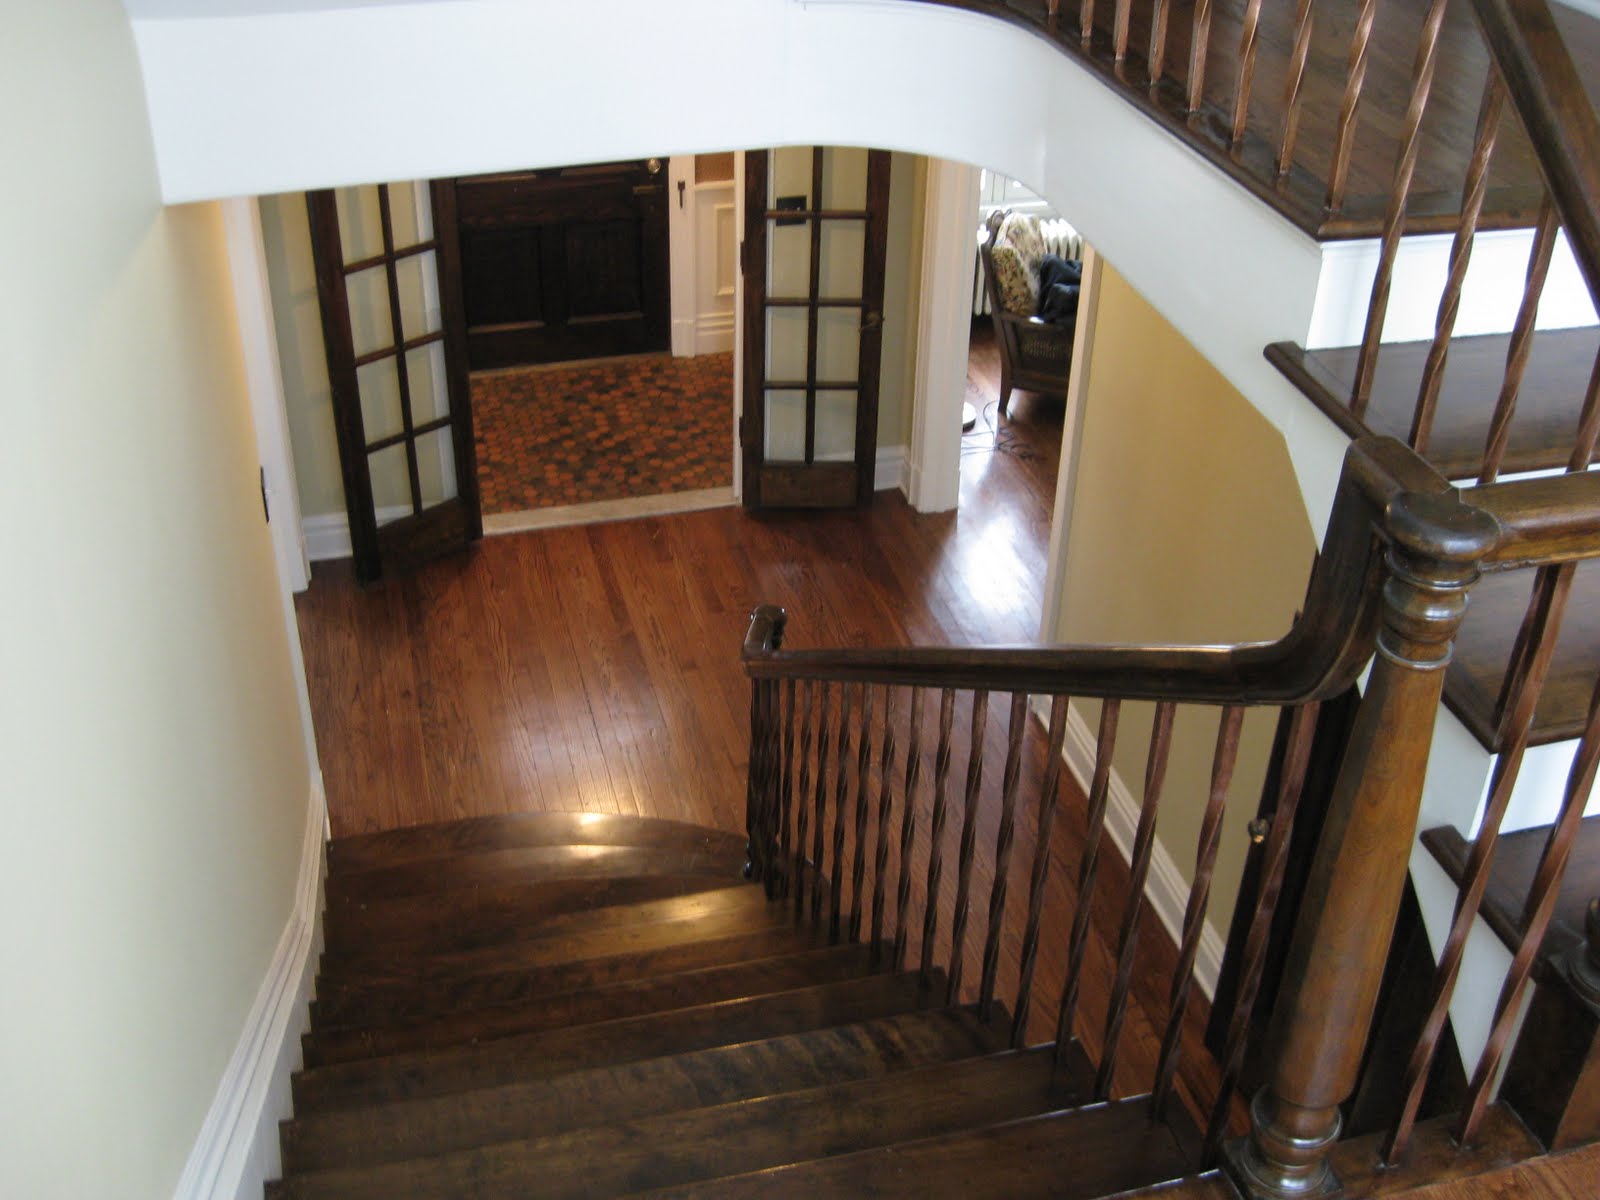 Wooden Style Basement Stunning Wooden Style Staircase Painting Basement Floor Design Equipped With Wooden Material Of Staircase With Wooden Flooring Unit Decoration  Painting Basement Floor For The Least Expensive Solution 